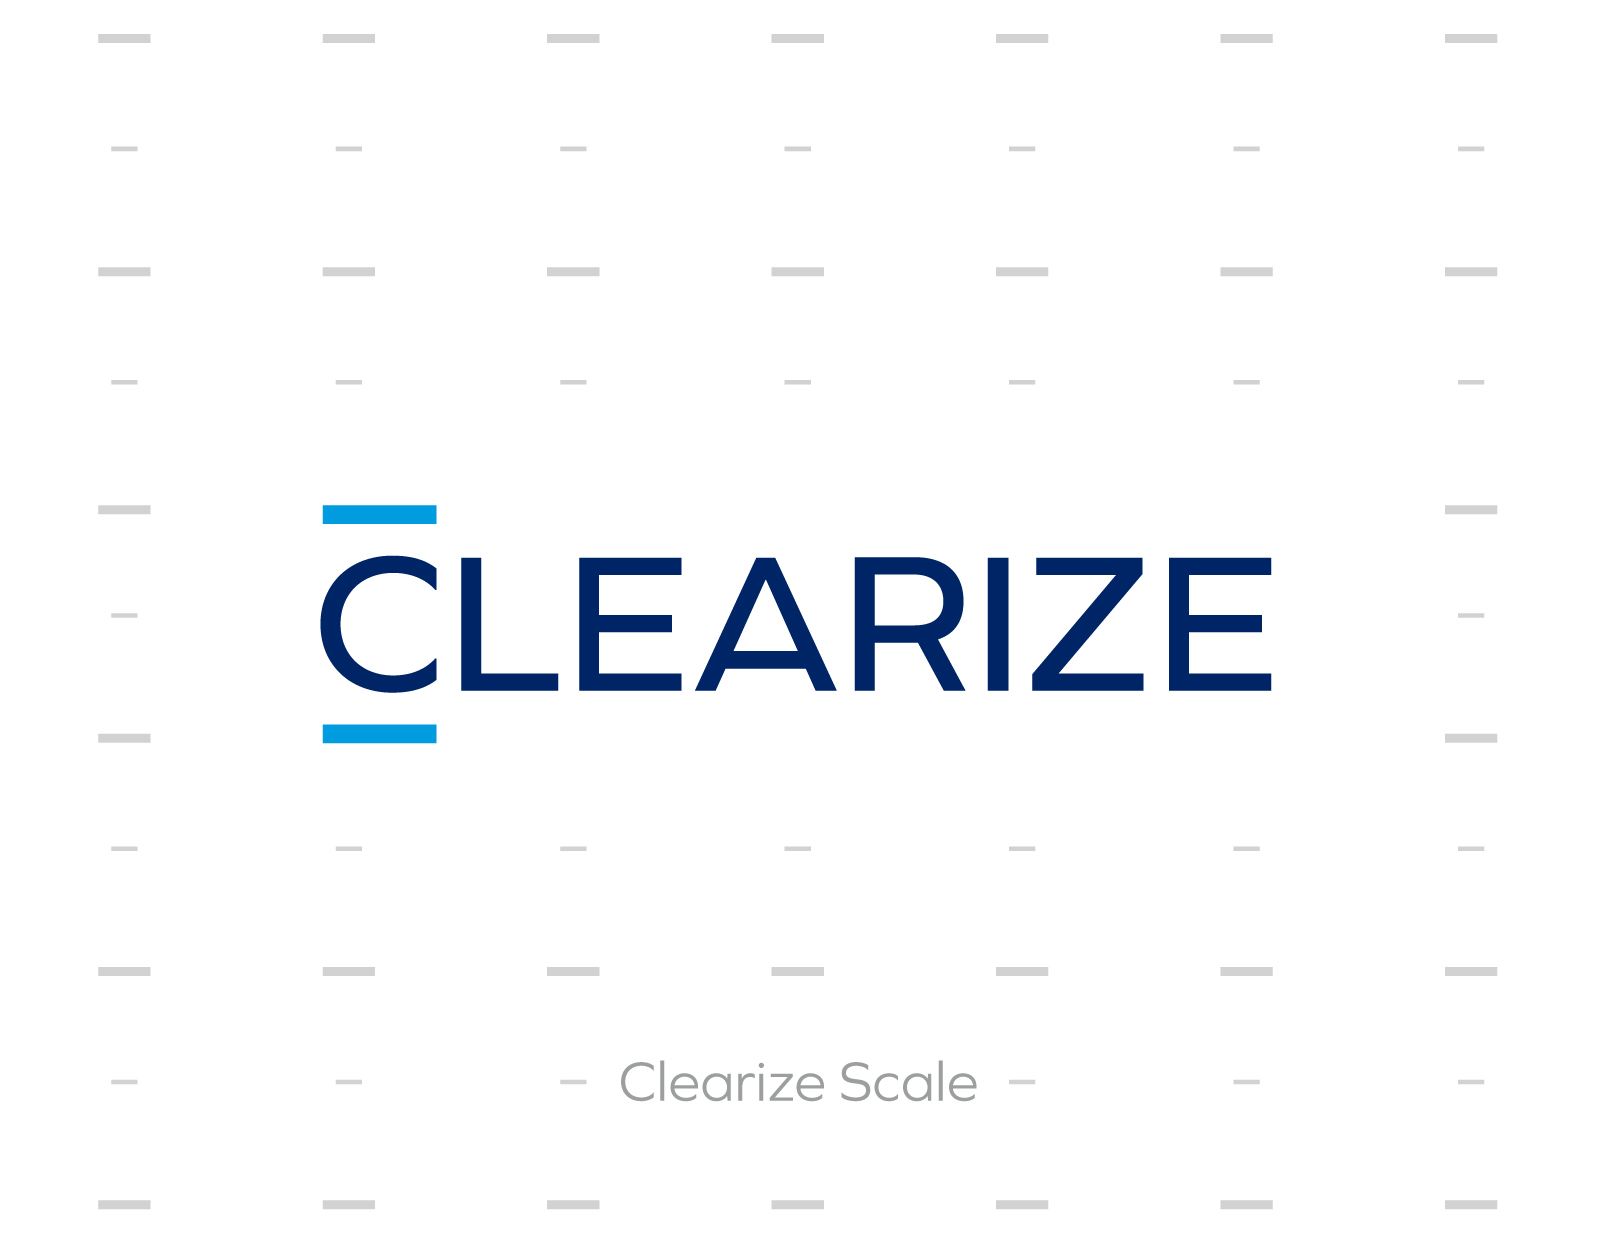 Clearize_Image_1